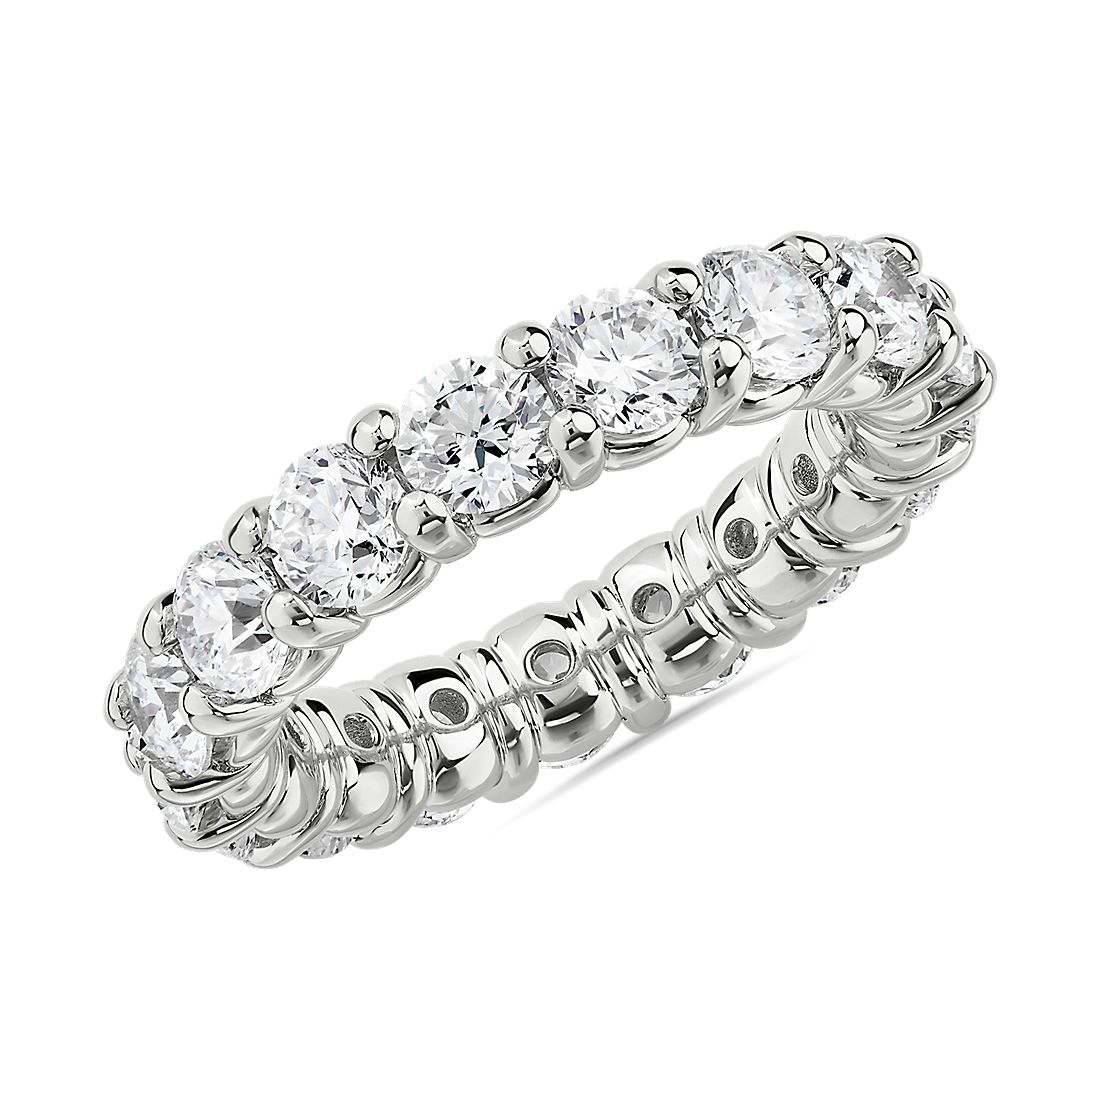 Comfort Fit Round Brilliant Diamond Eternity Ring in 18k White Gold (4 ct. tw.)